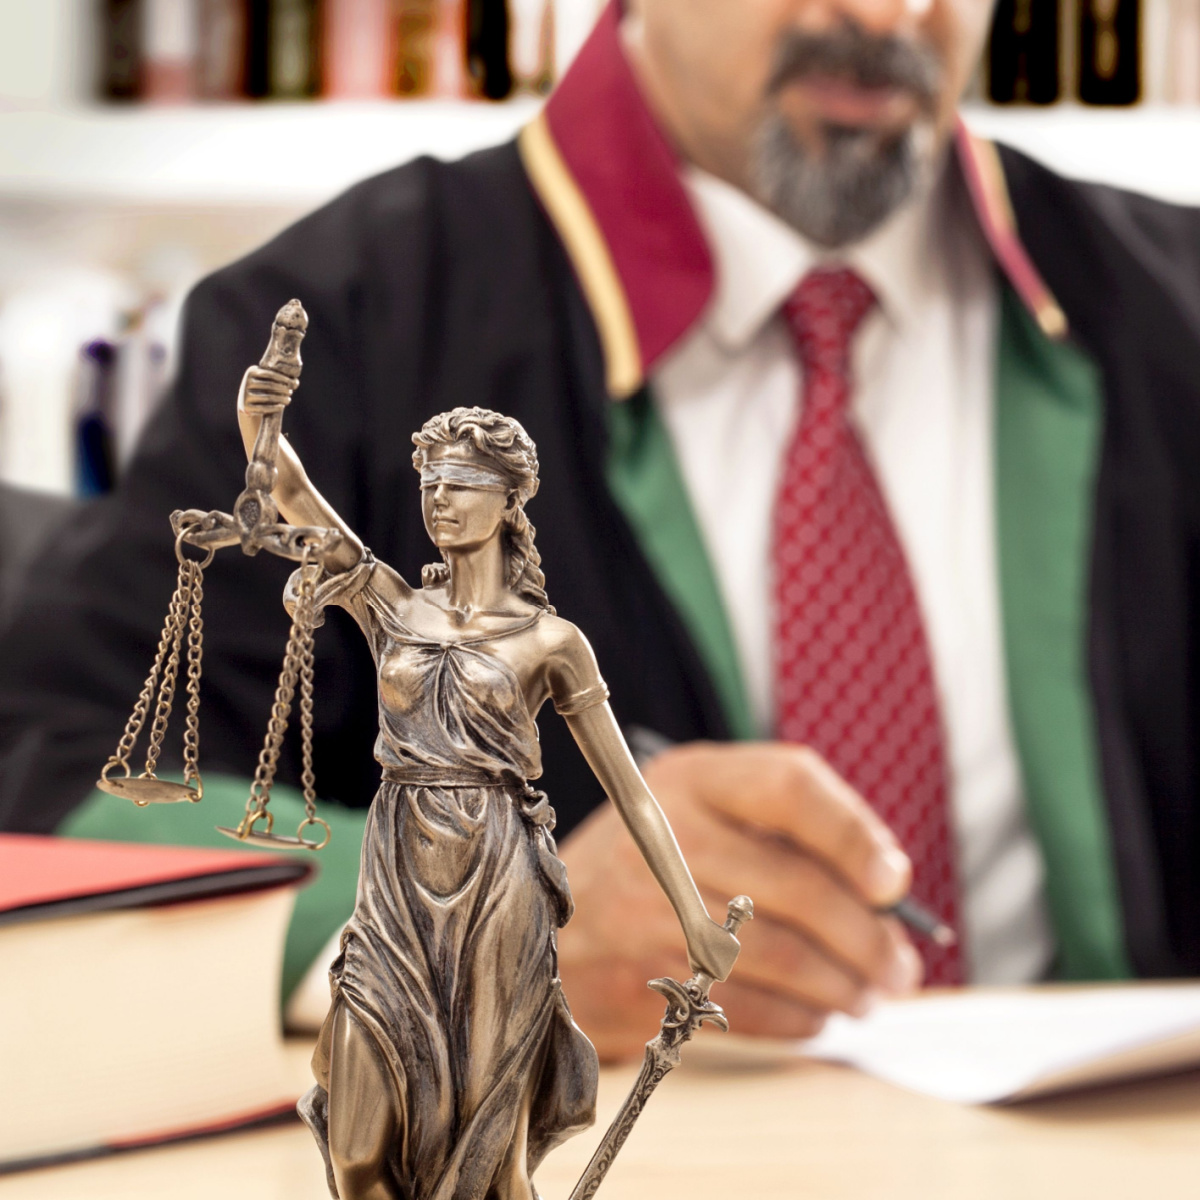 Securing a Houston personal injury lawyer benefits your settlement claim.